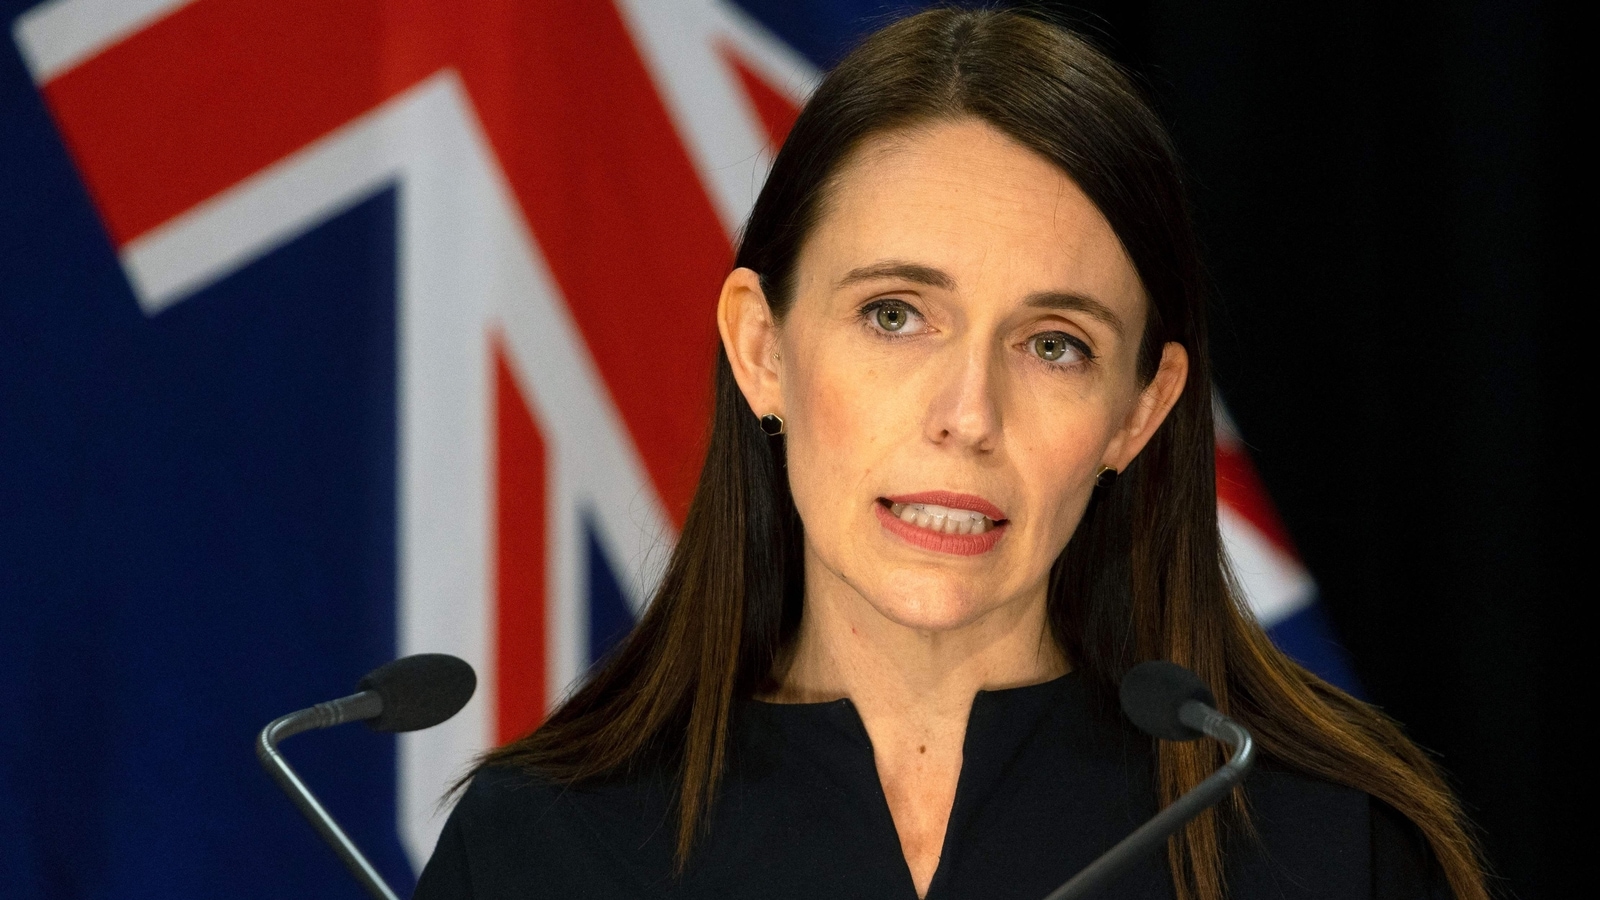 ‘Relentless positivity’: Jacinda Ardern's legacy and crisis in New Zealand